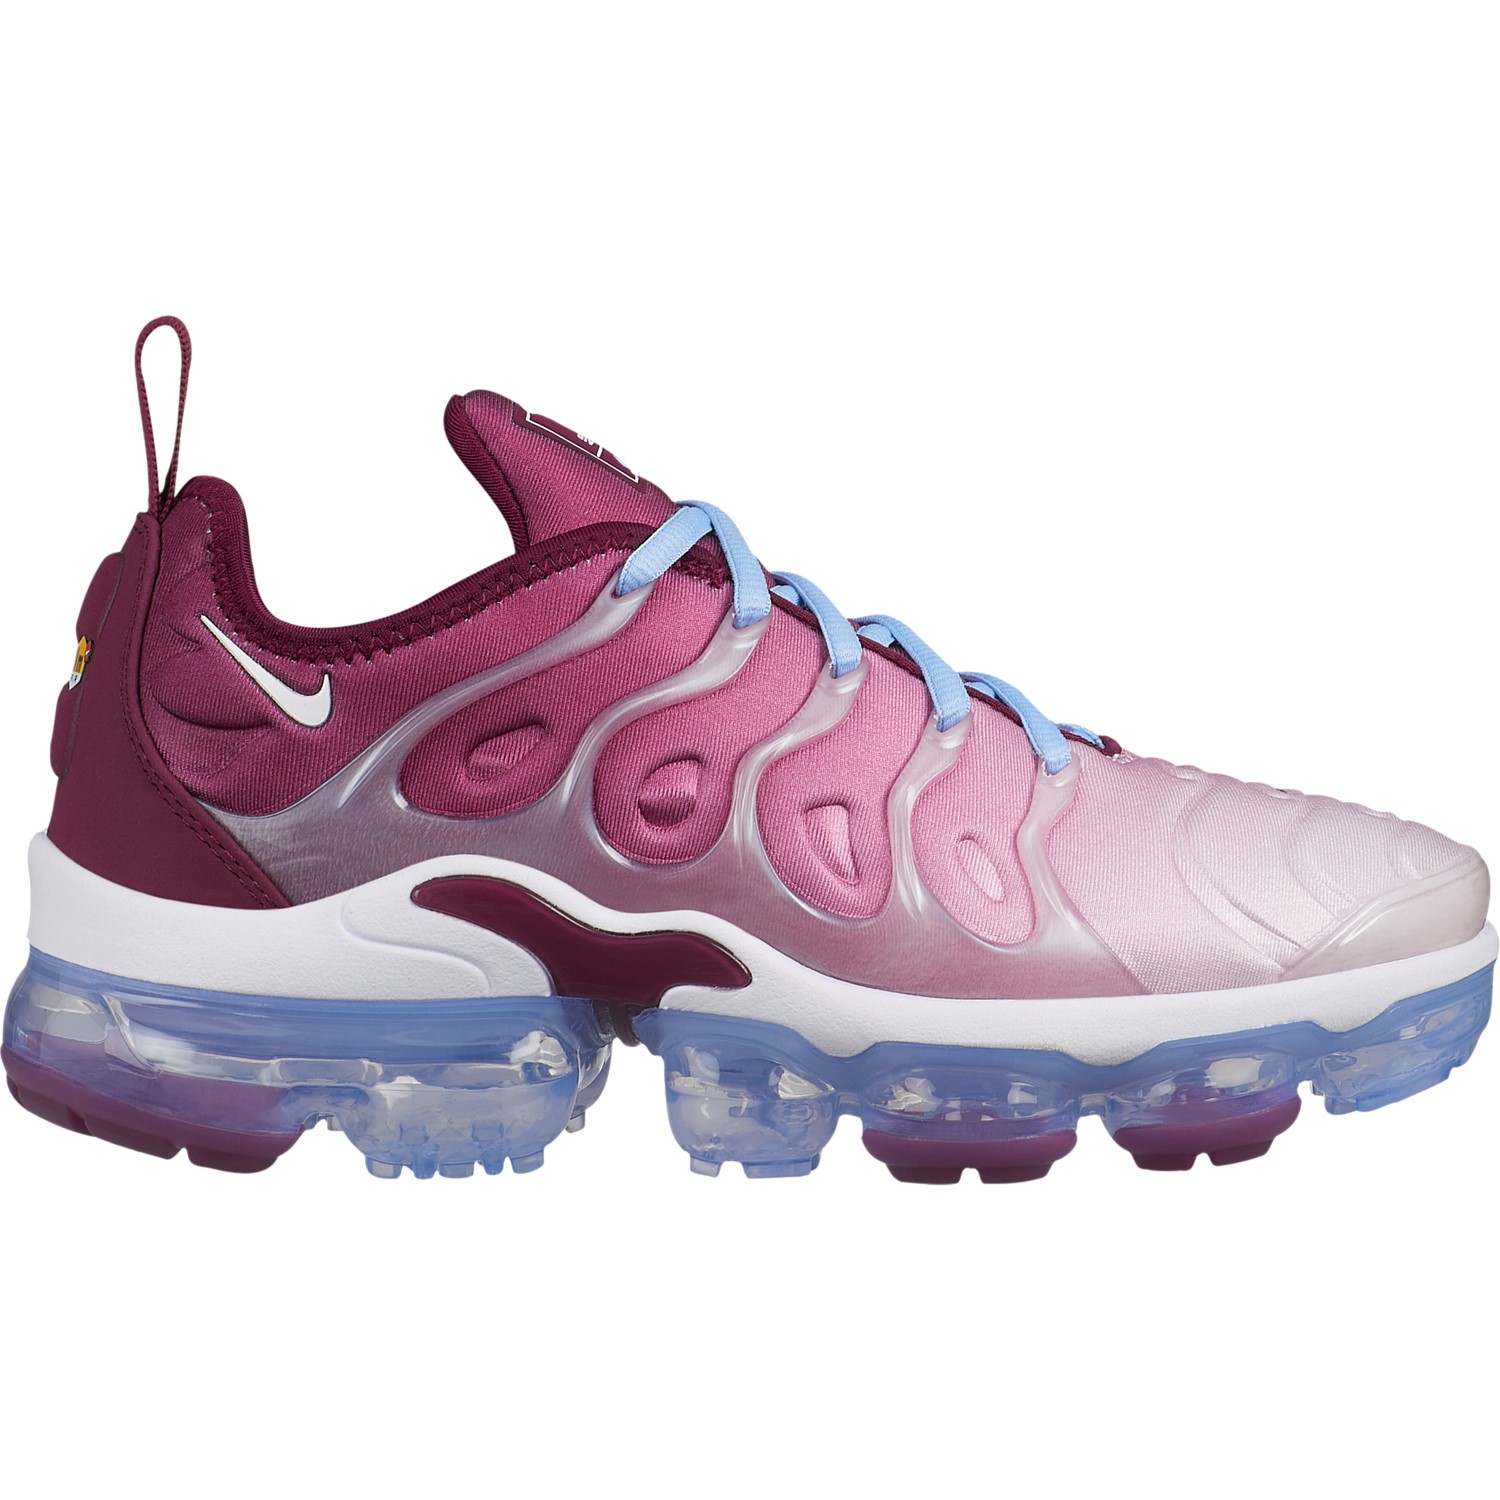 Stirling Sports - Air VaporMax Plus Womens